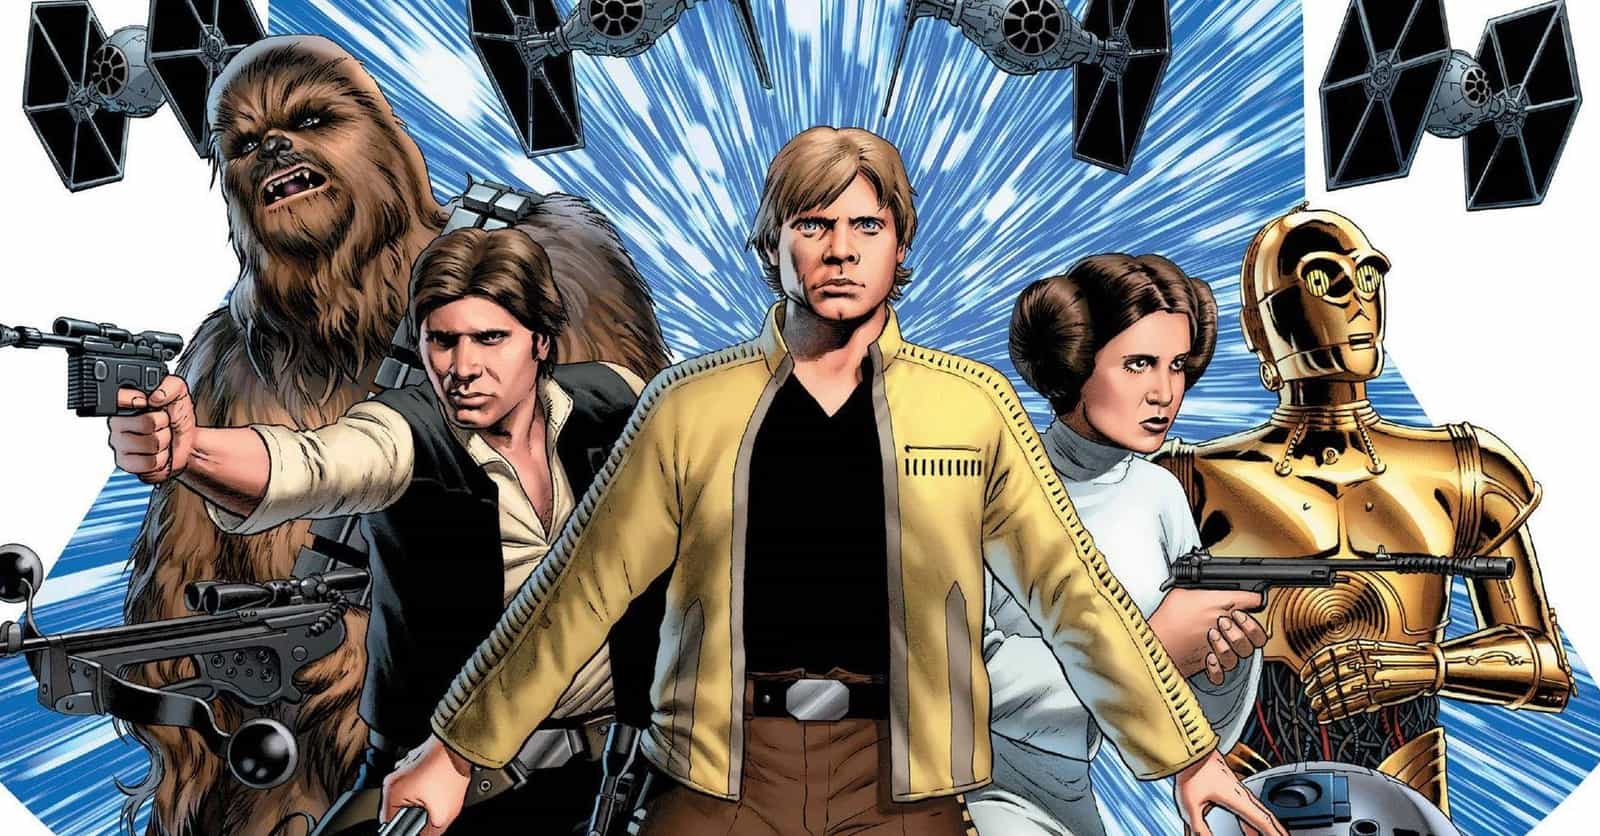 Unbelievable Revelations About The 'Star Wars' Canon From The Official Comics